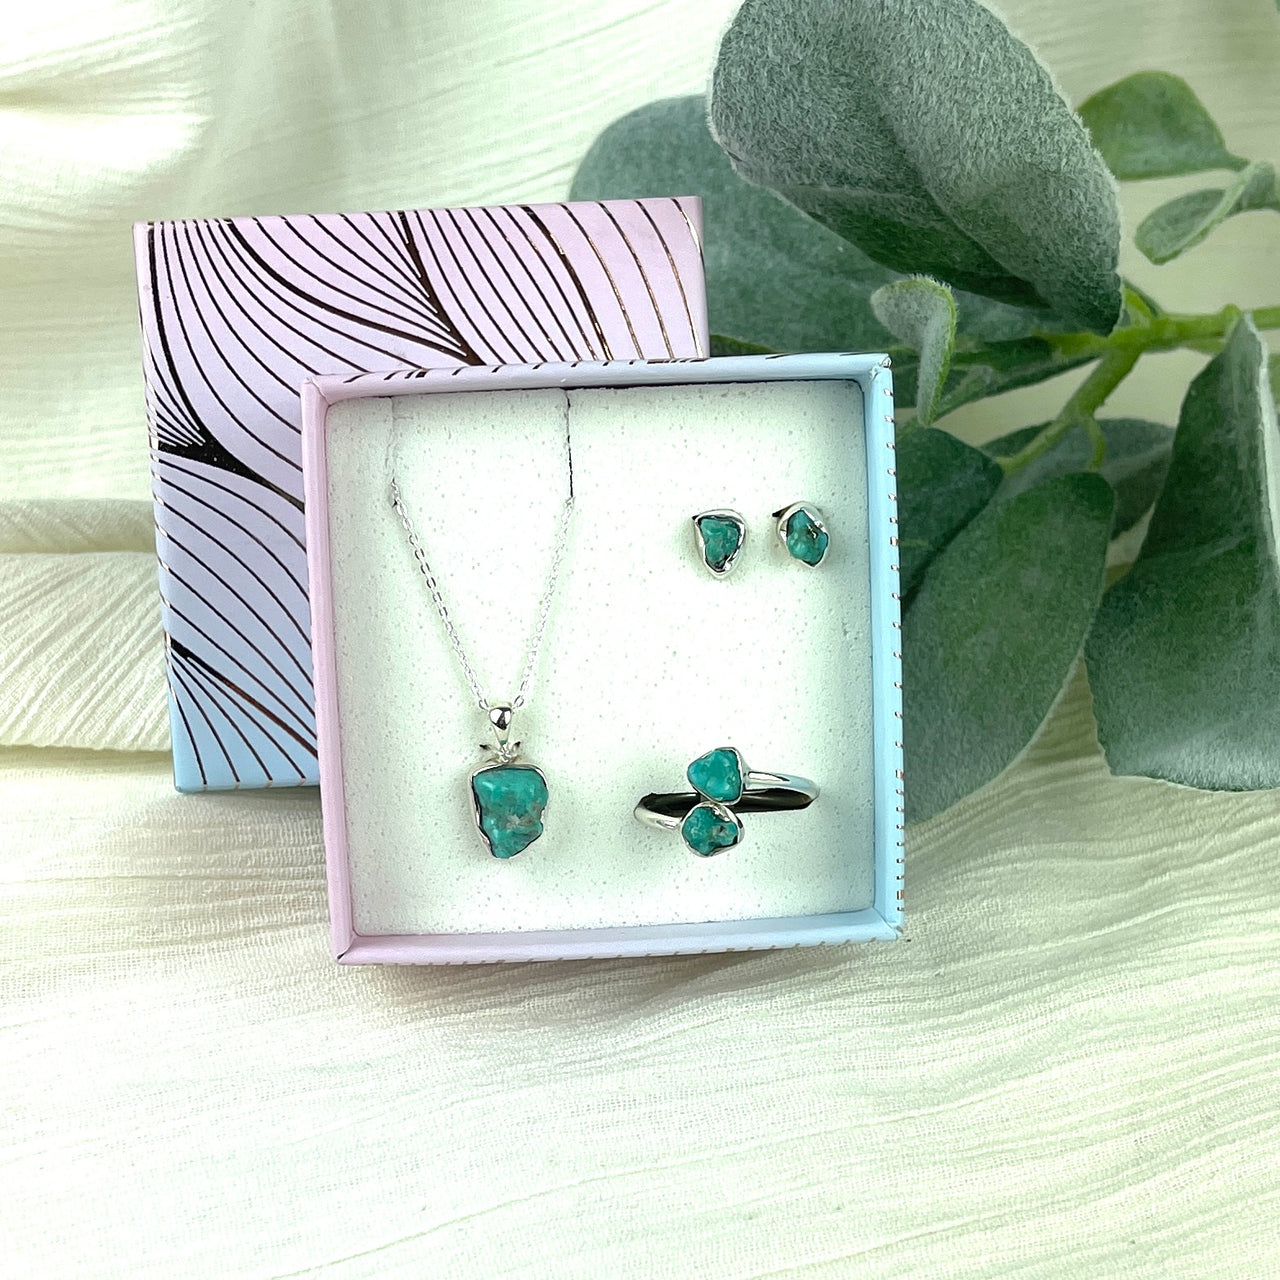 Turquoise Jewelry 3 pc Box Set Sterling Silver Earrings, Pendant, Adjustable Ring #J851